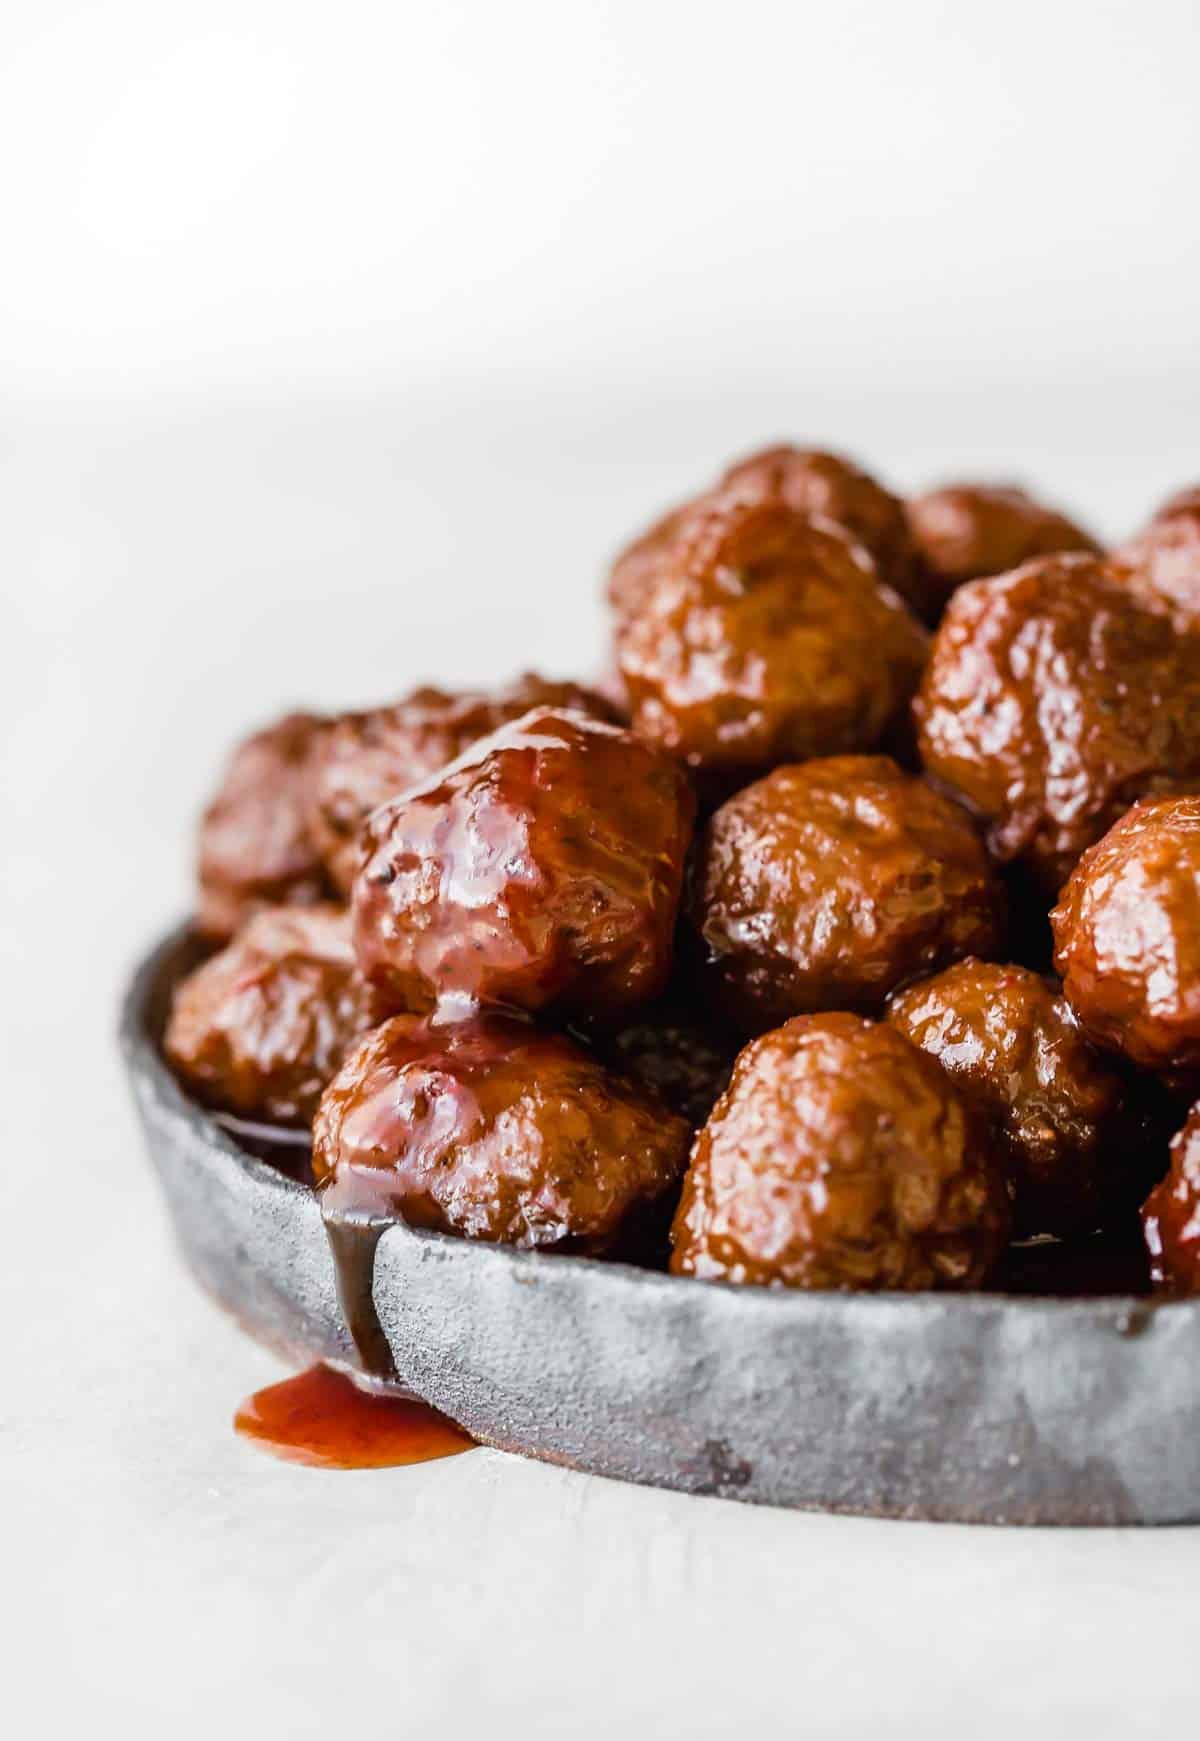 Grape Jelly Meatballs on a black plate against a white background.